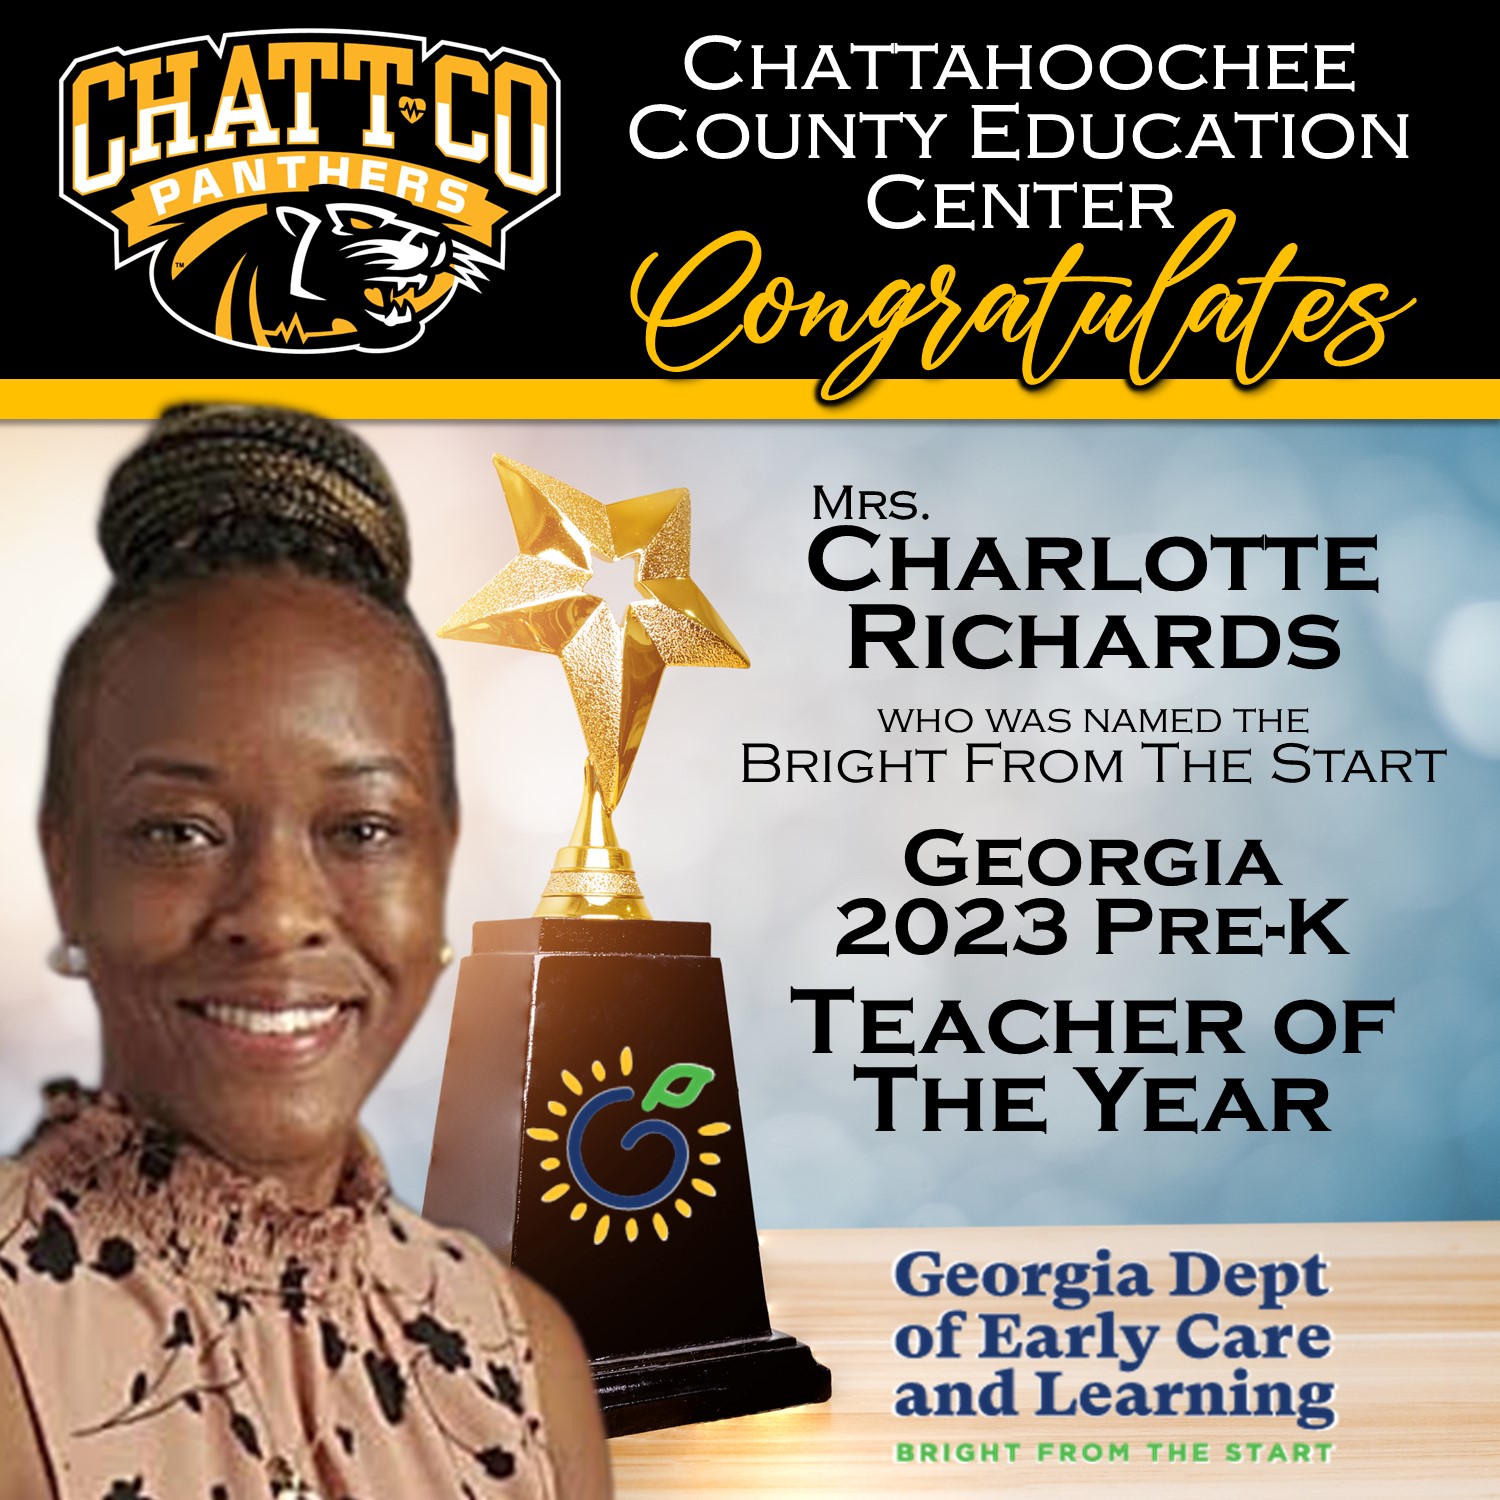 CCEC Congratulates Mrs Charlotte Richards who was named the Bright from the Start Georgia 2023 Pre-K Teacher of the Year. Georgia Dept of Early Care and Learning.